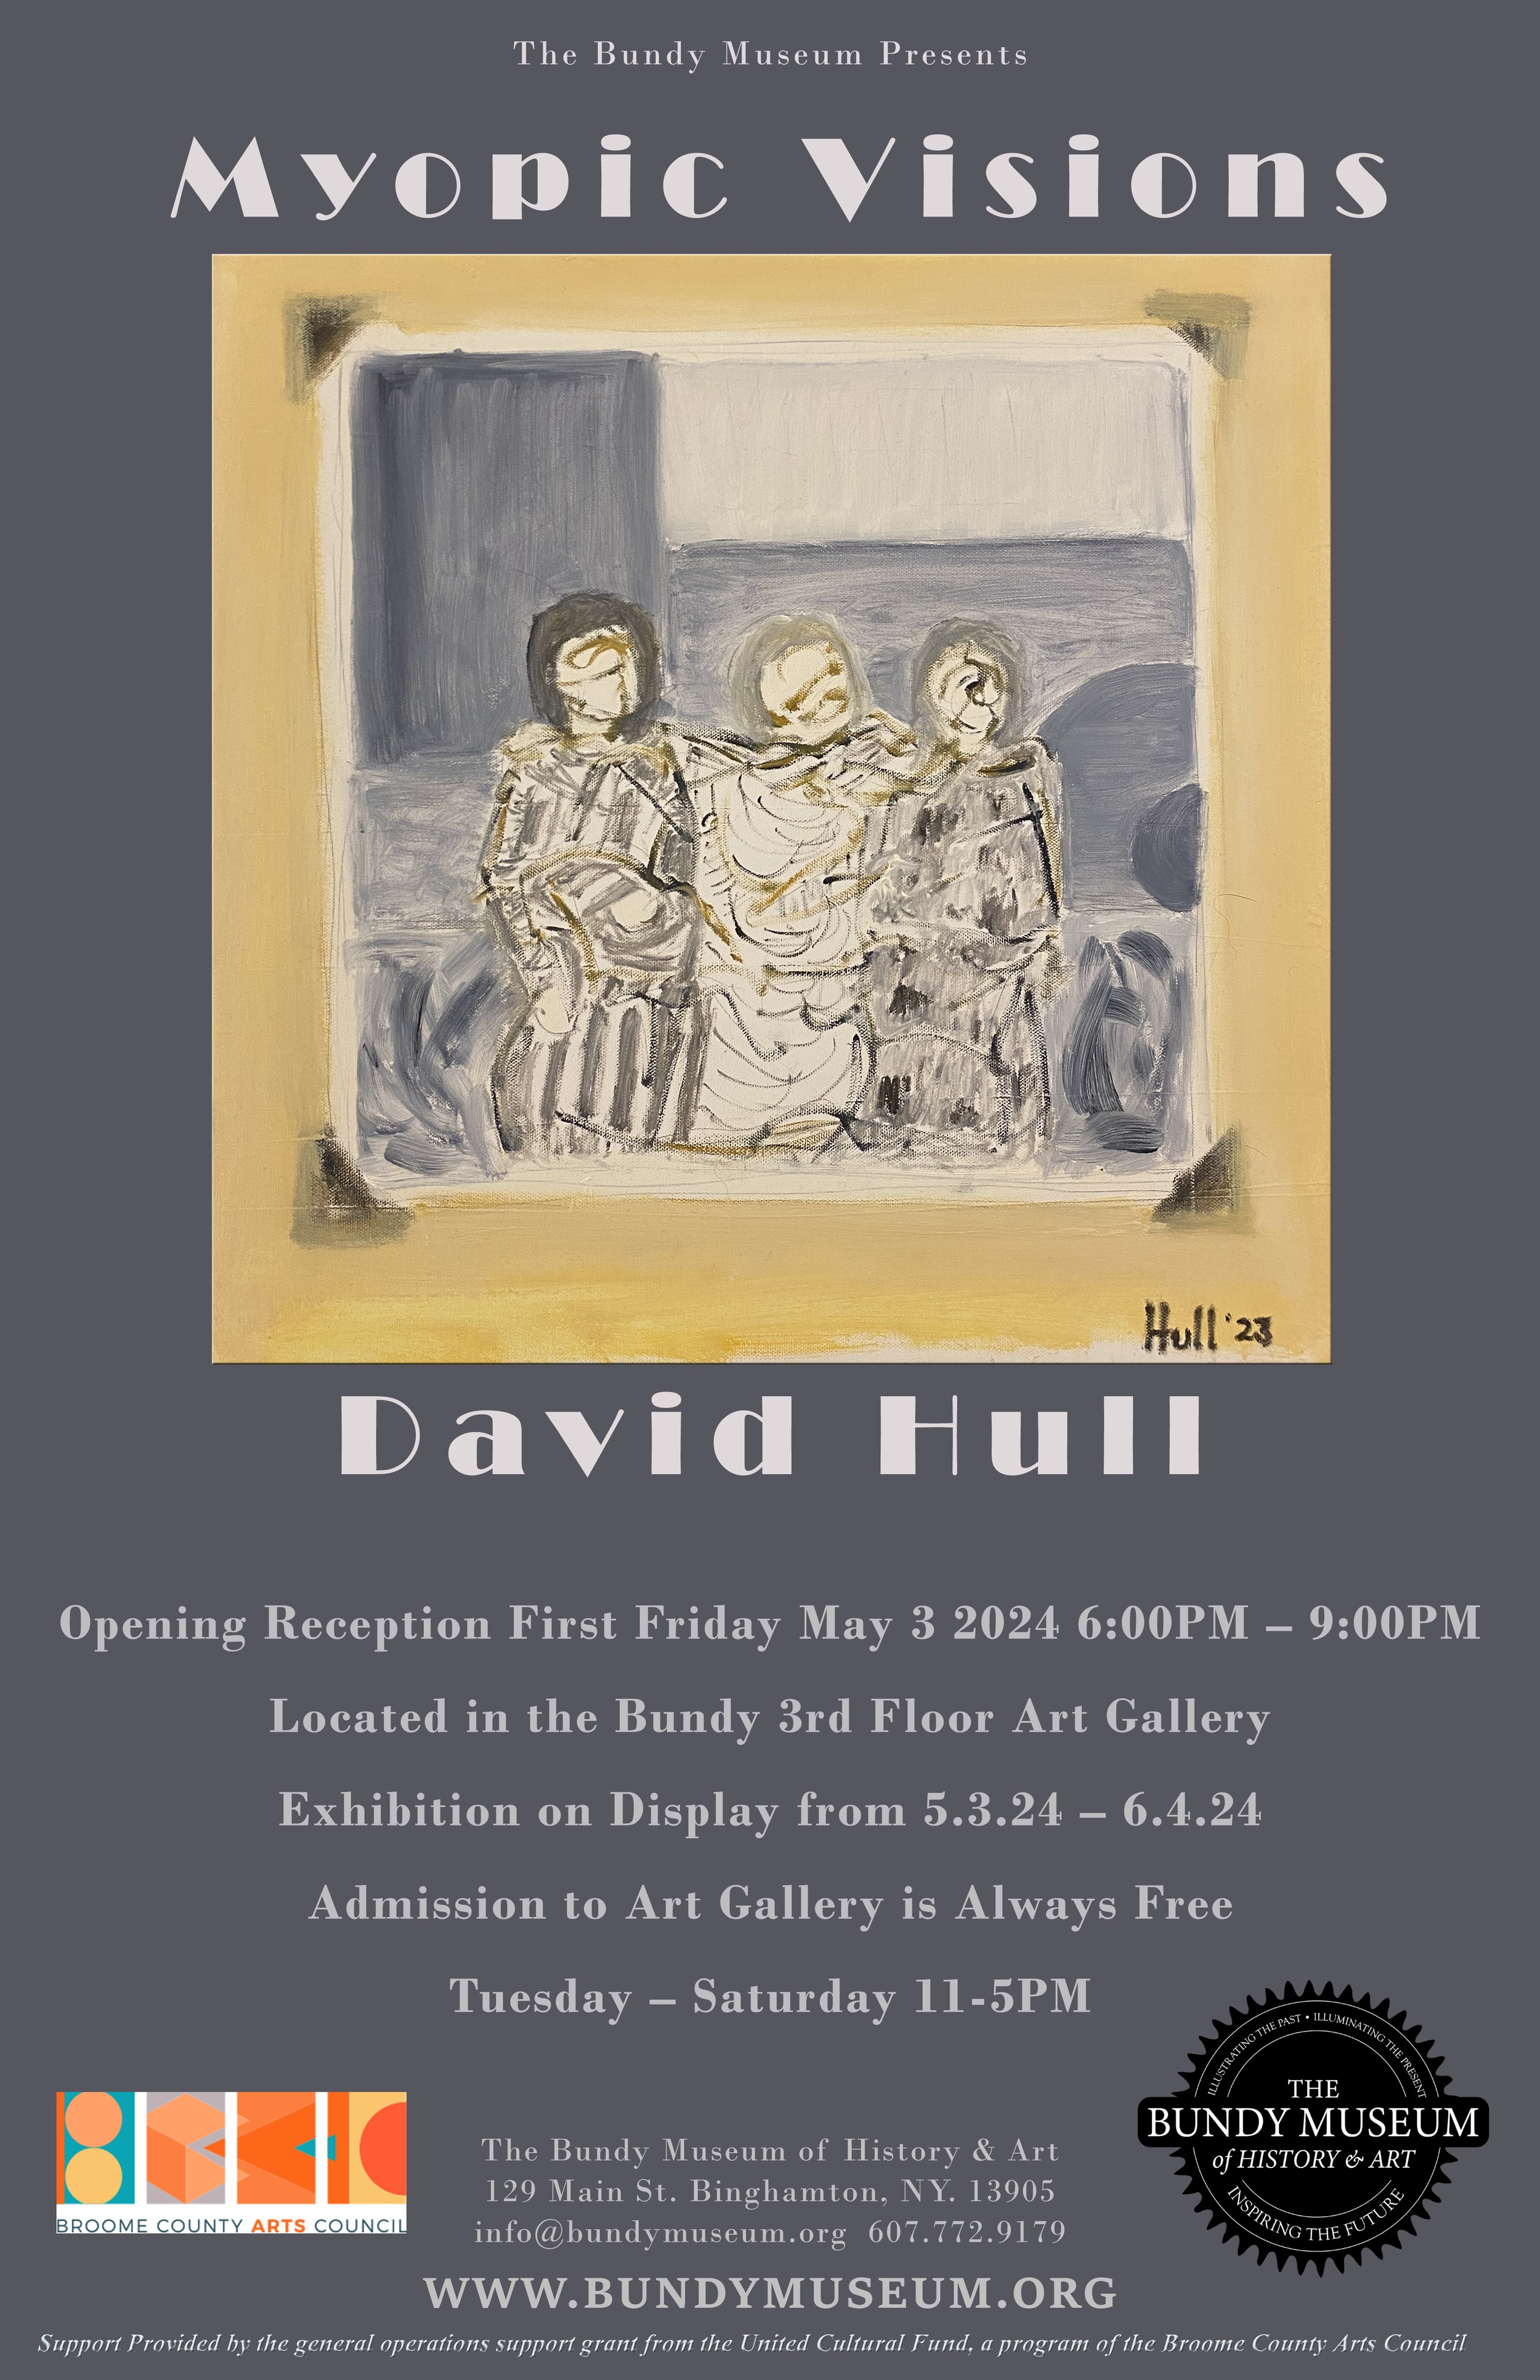 First Friday Opening Reception, May 3rd, 2024 - from 6 - 9 pm